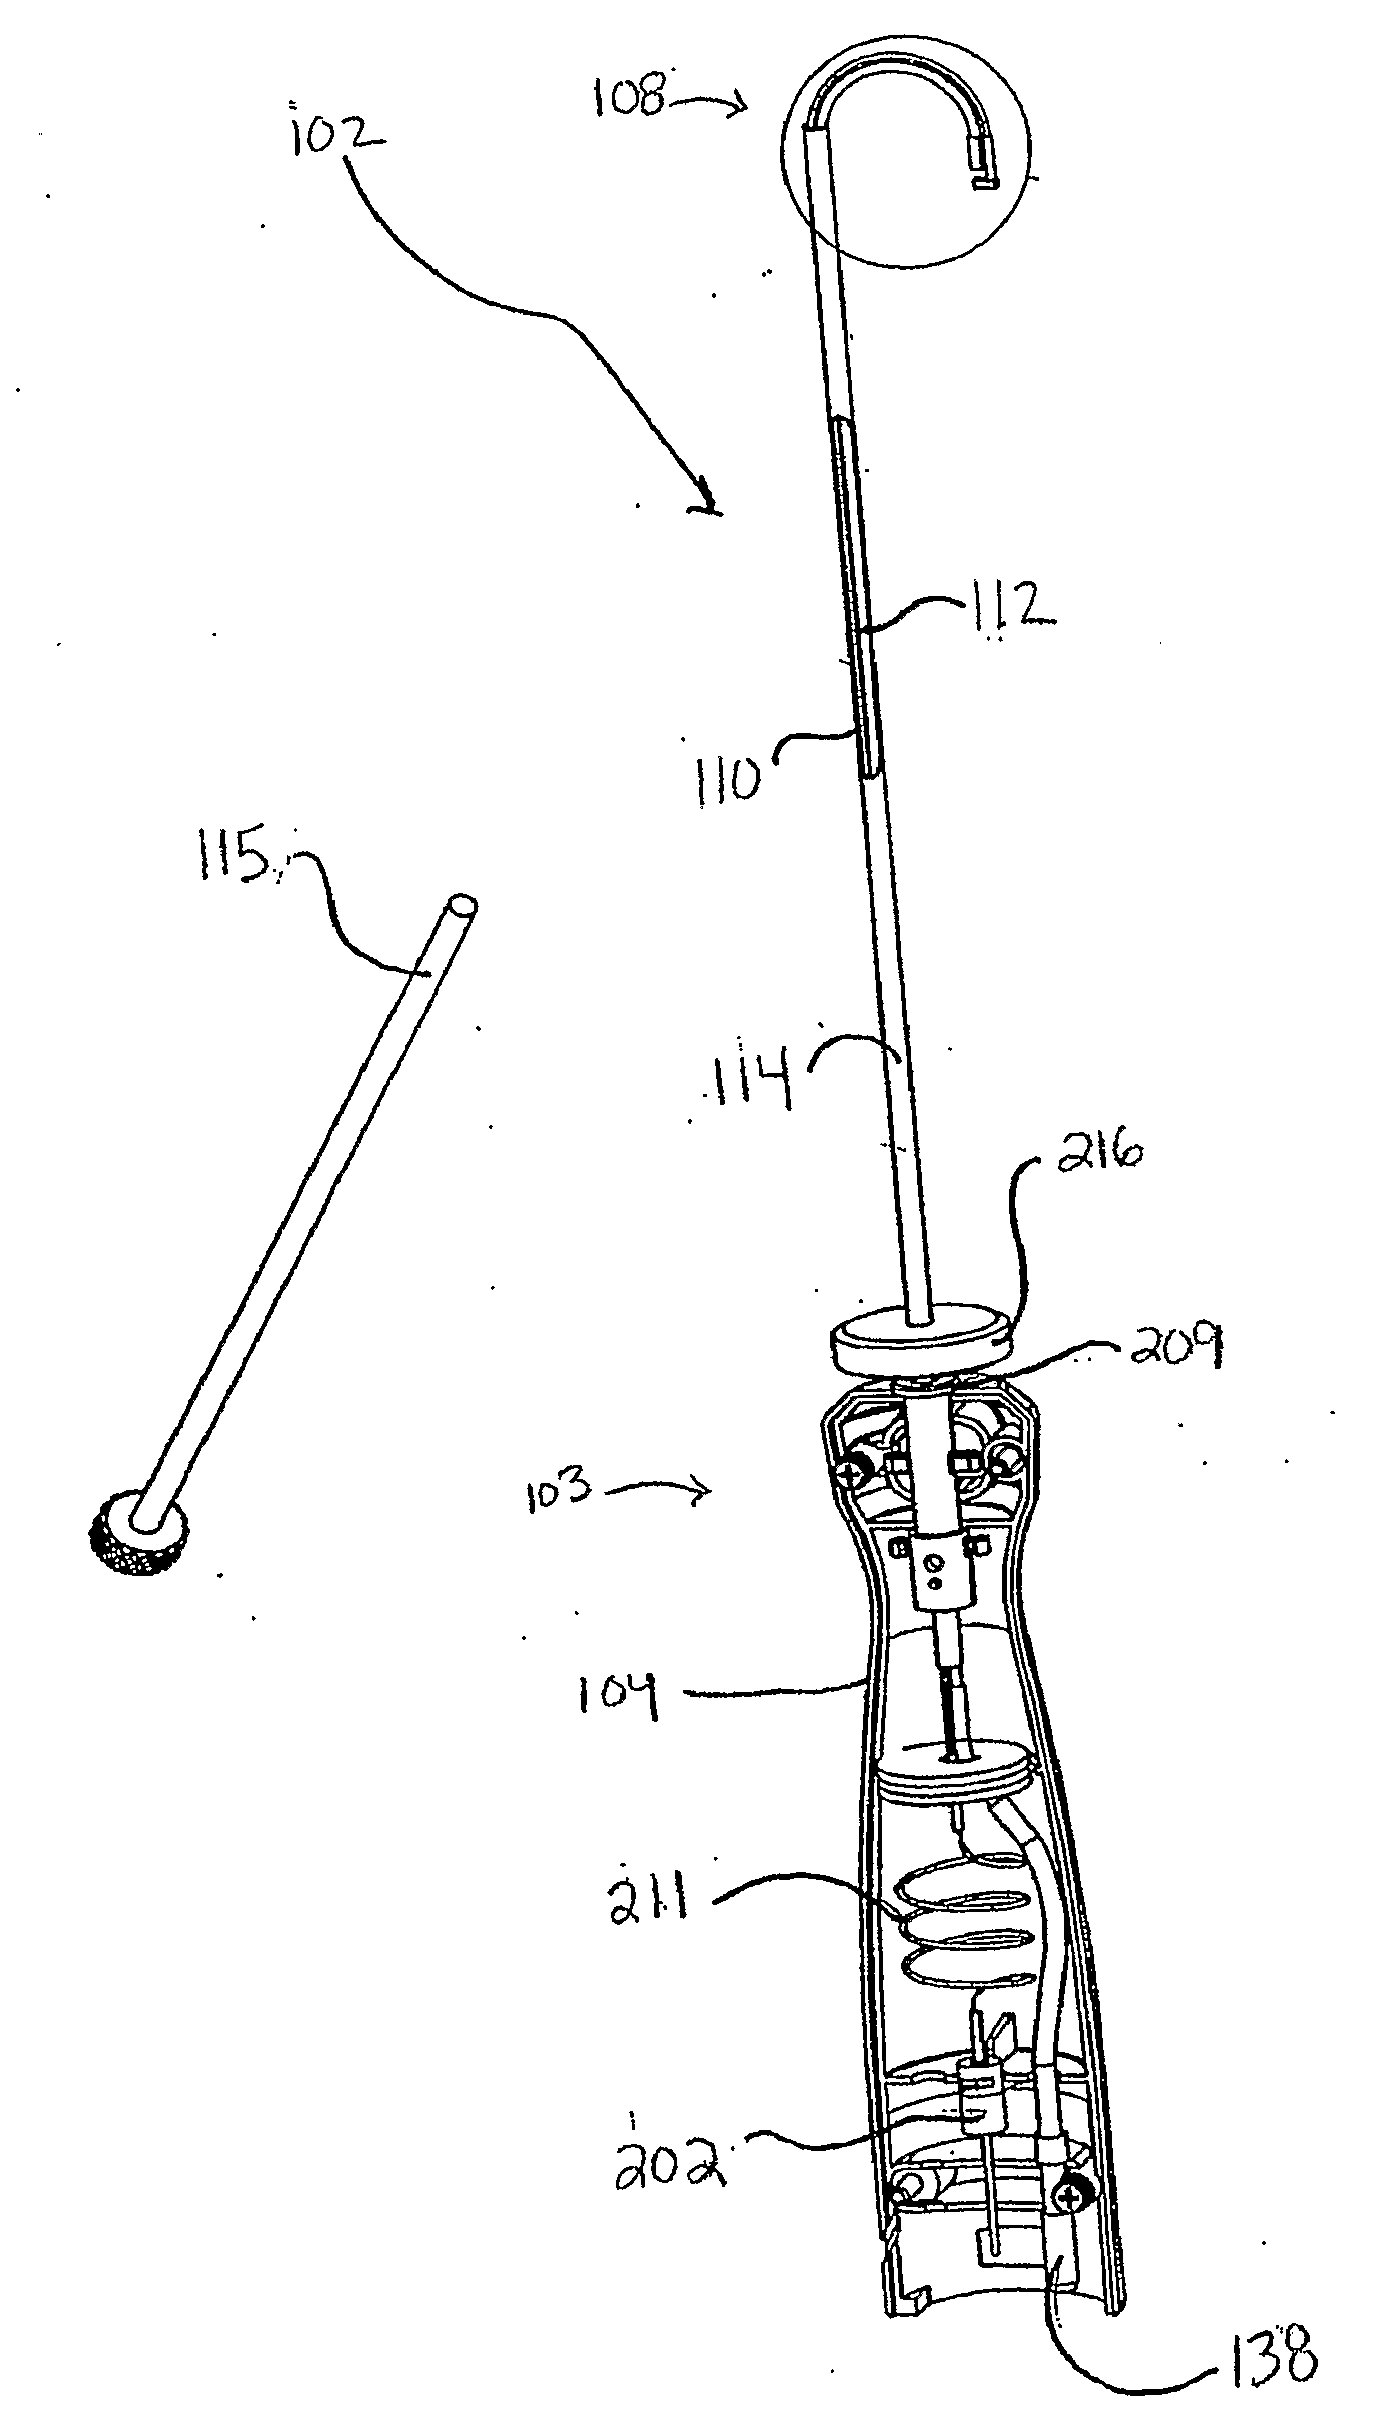 Liquid jet surgical instrument having a distal end with a selectively controllable shape